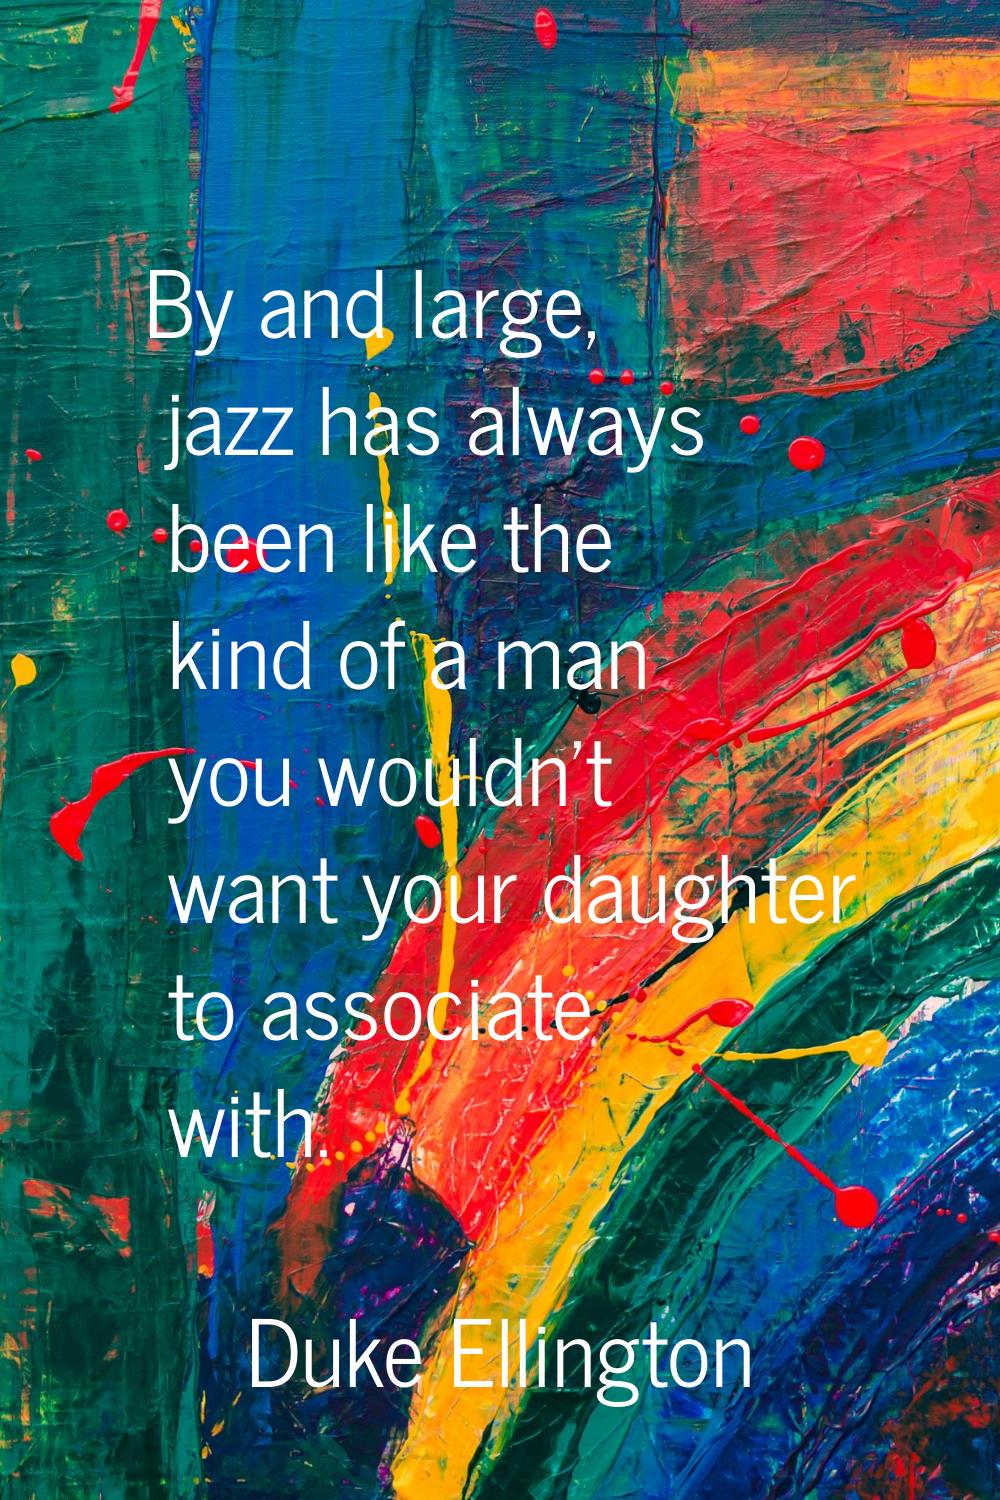 By and large, jazz has always been like the kind of a man you wouldn't want your daughter to associ